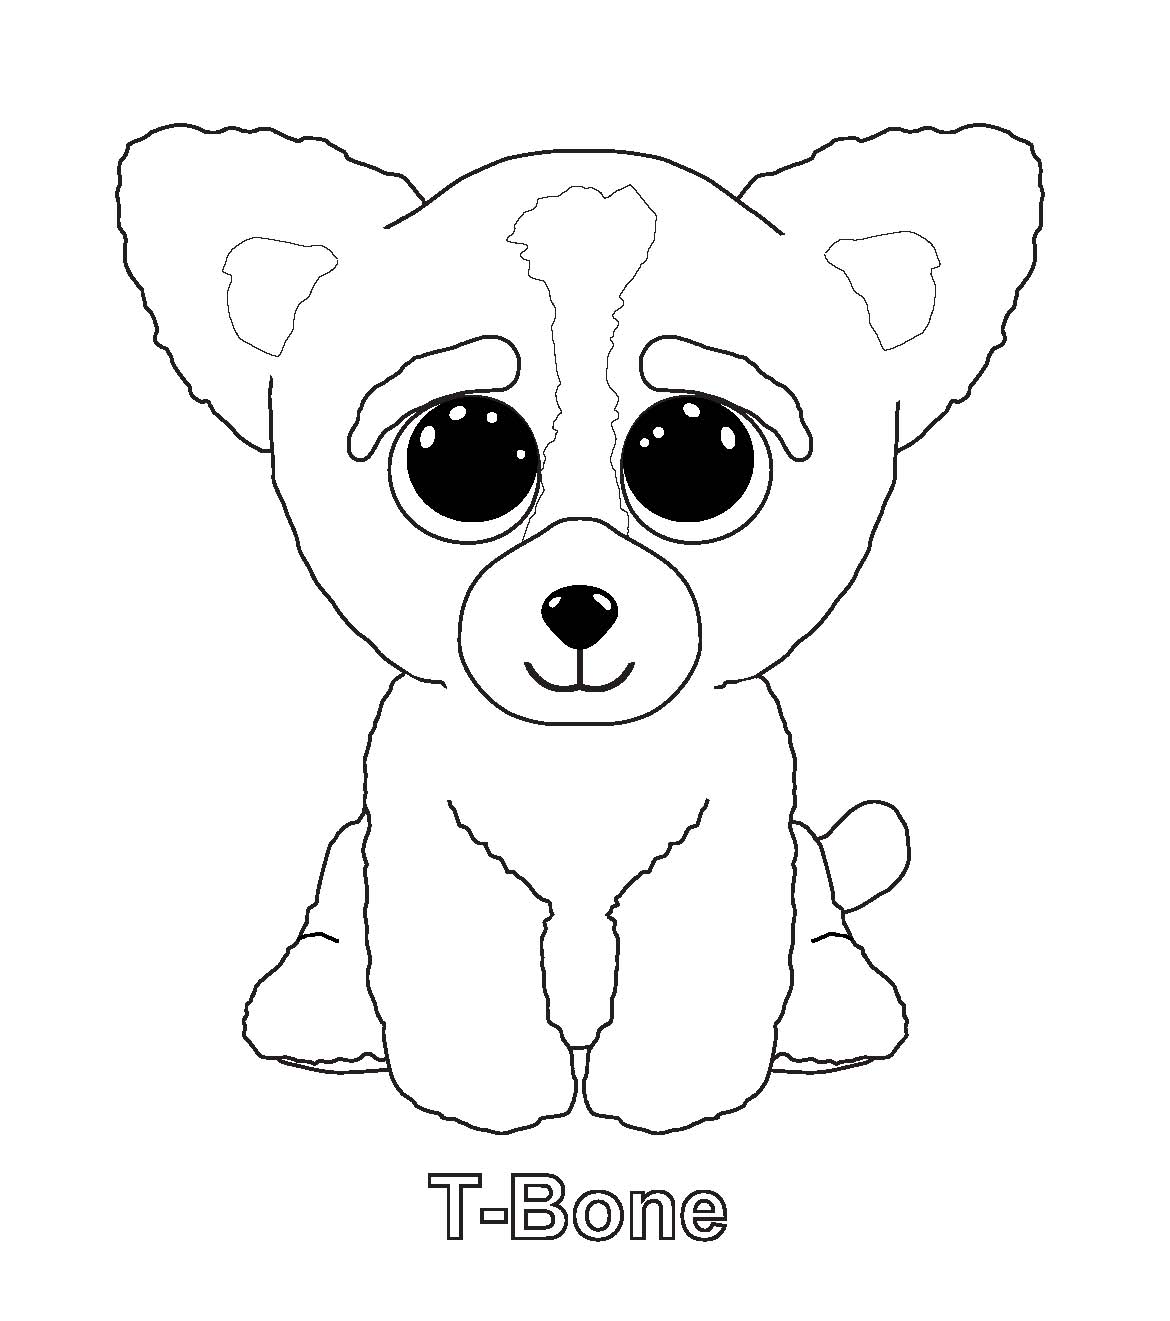 Free Ty beanie boo coloring pages to print for kids Download print and color